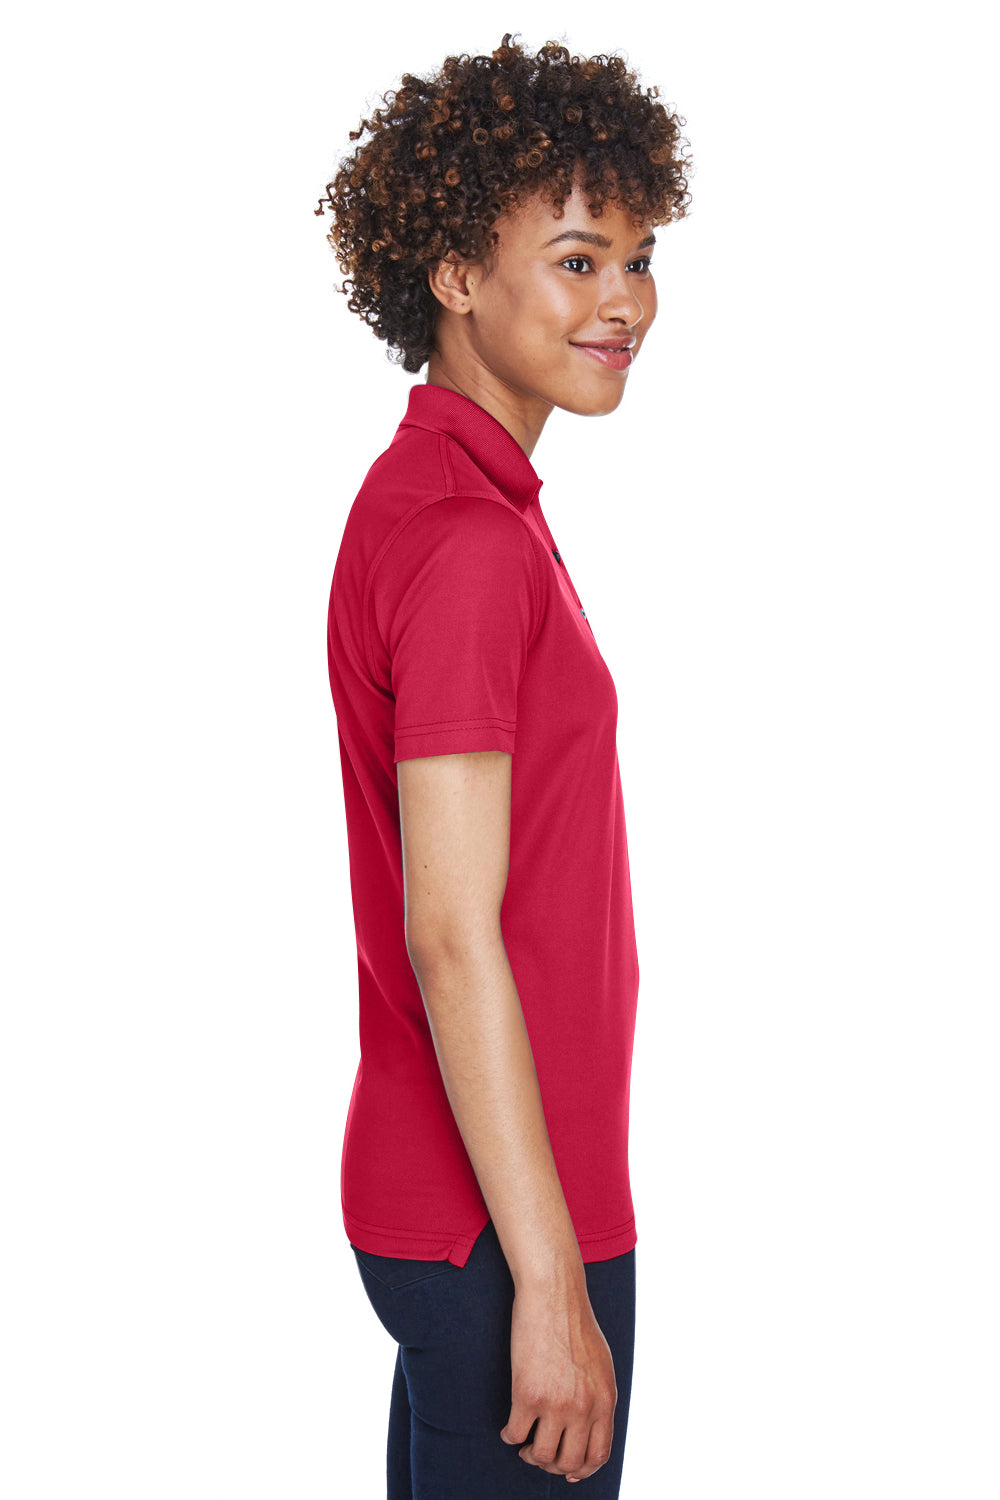 UltraClub 8210L Womens Cool & Dry Moisture Wicking Short Sleeve Polo Shirt Cardinal Red Side